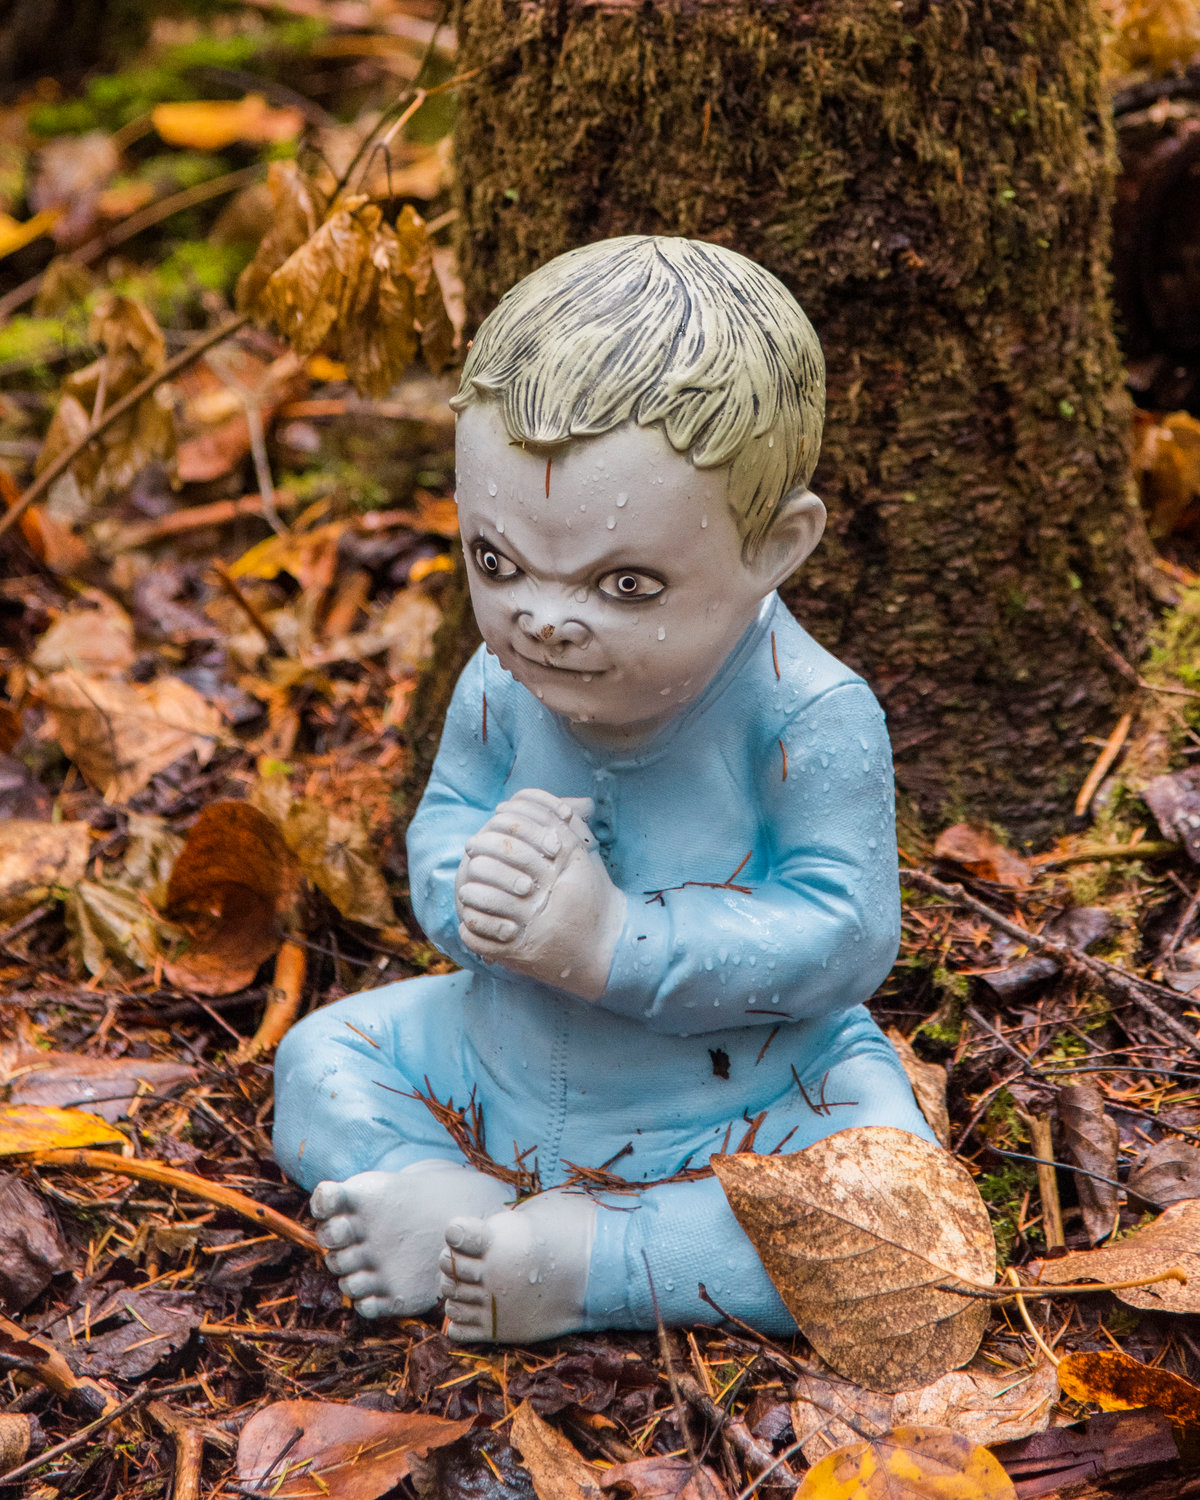 A spooky figure resembling a child sits next to a stump in the haunted forest in The Huntting’s Farm in Cinebar Wednesday afternoon.